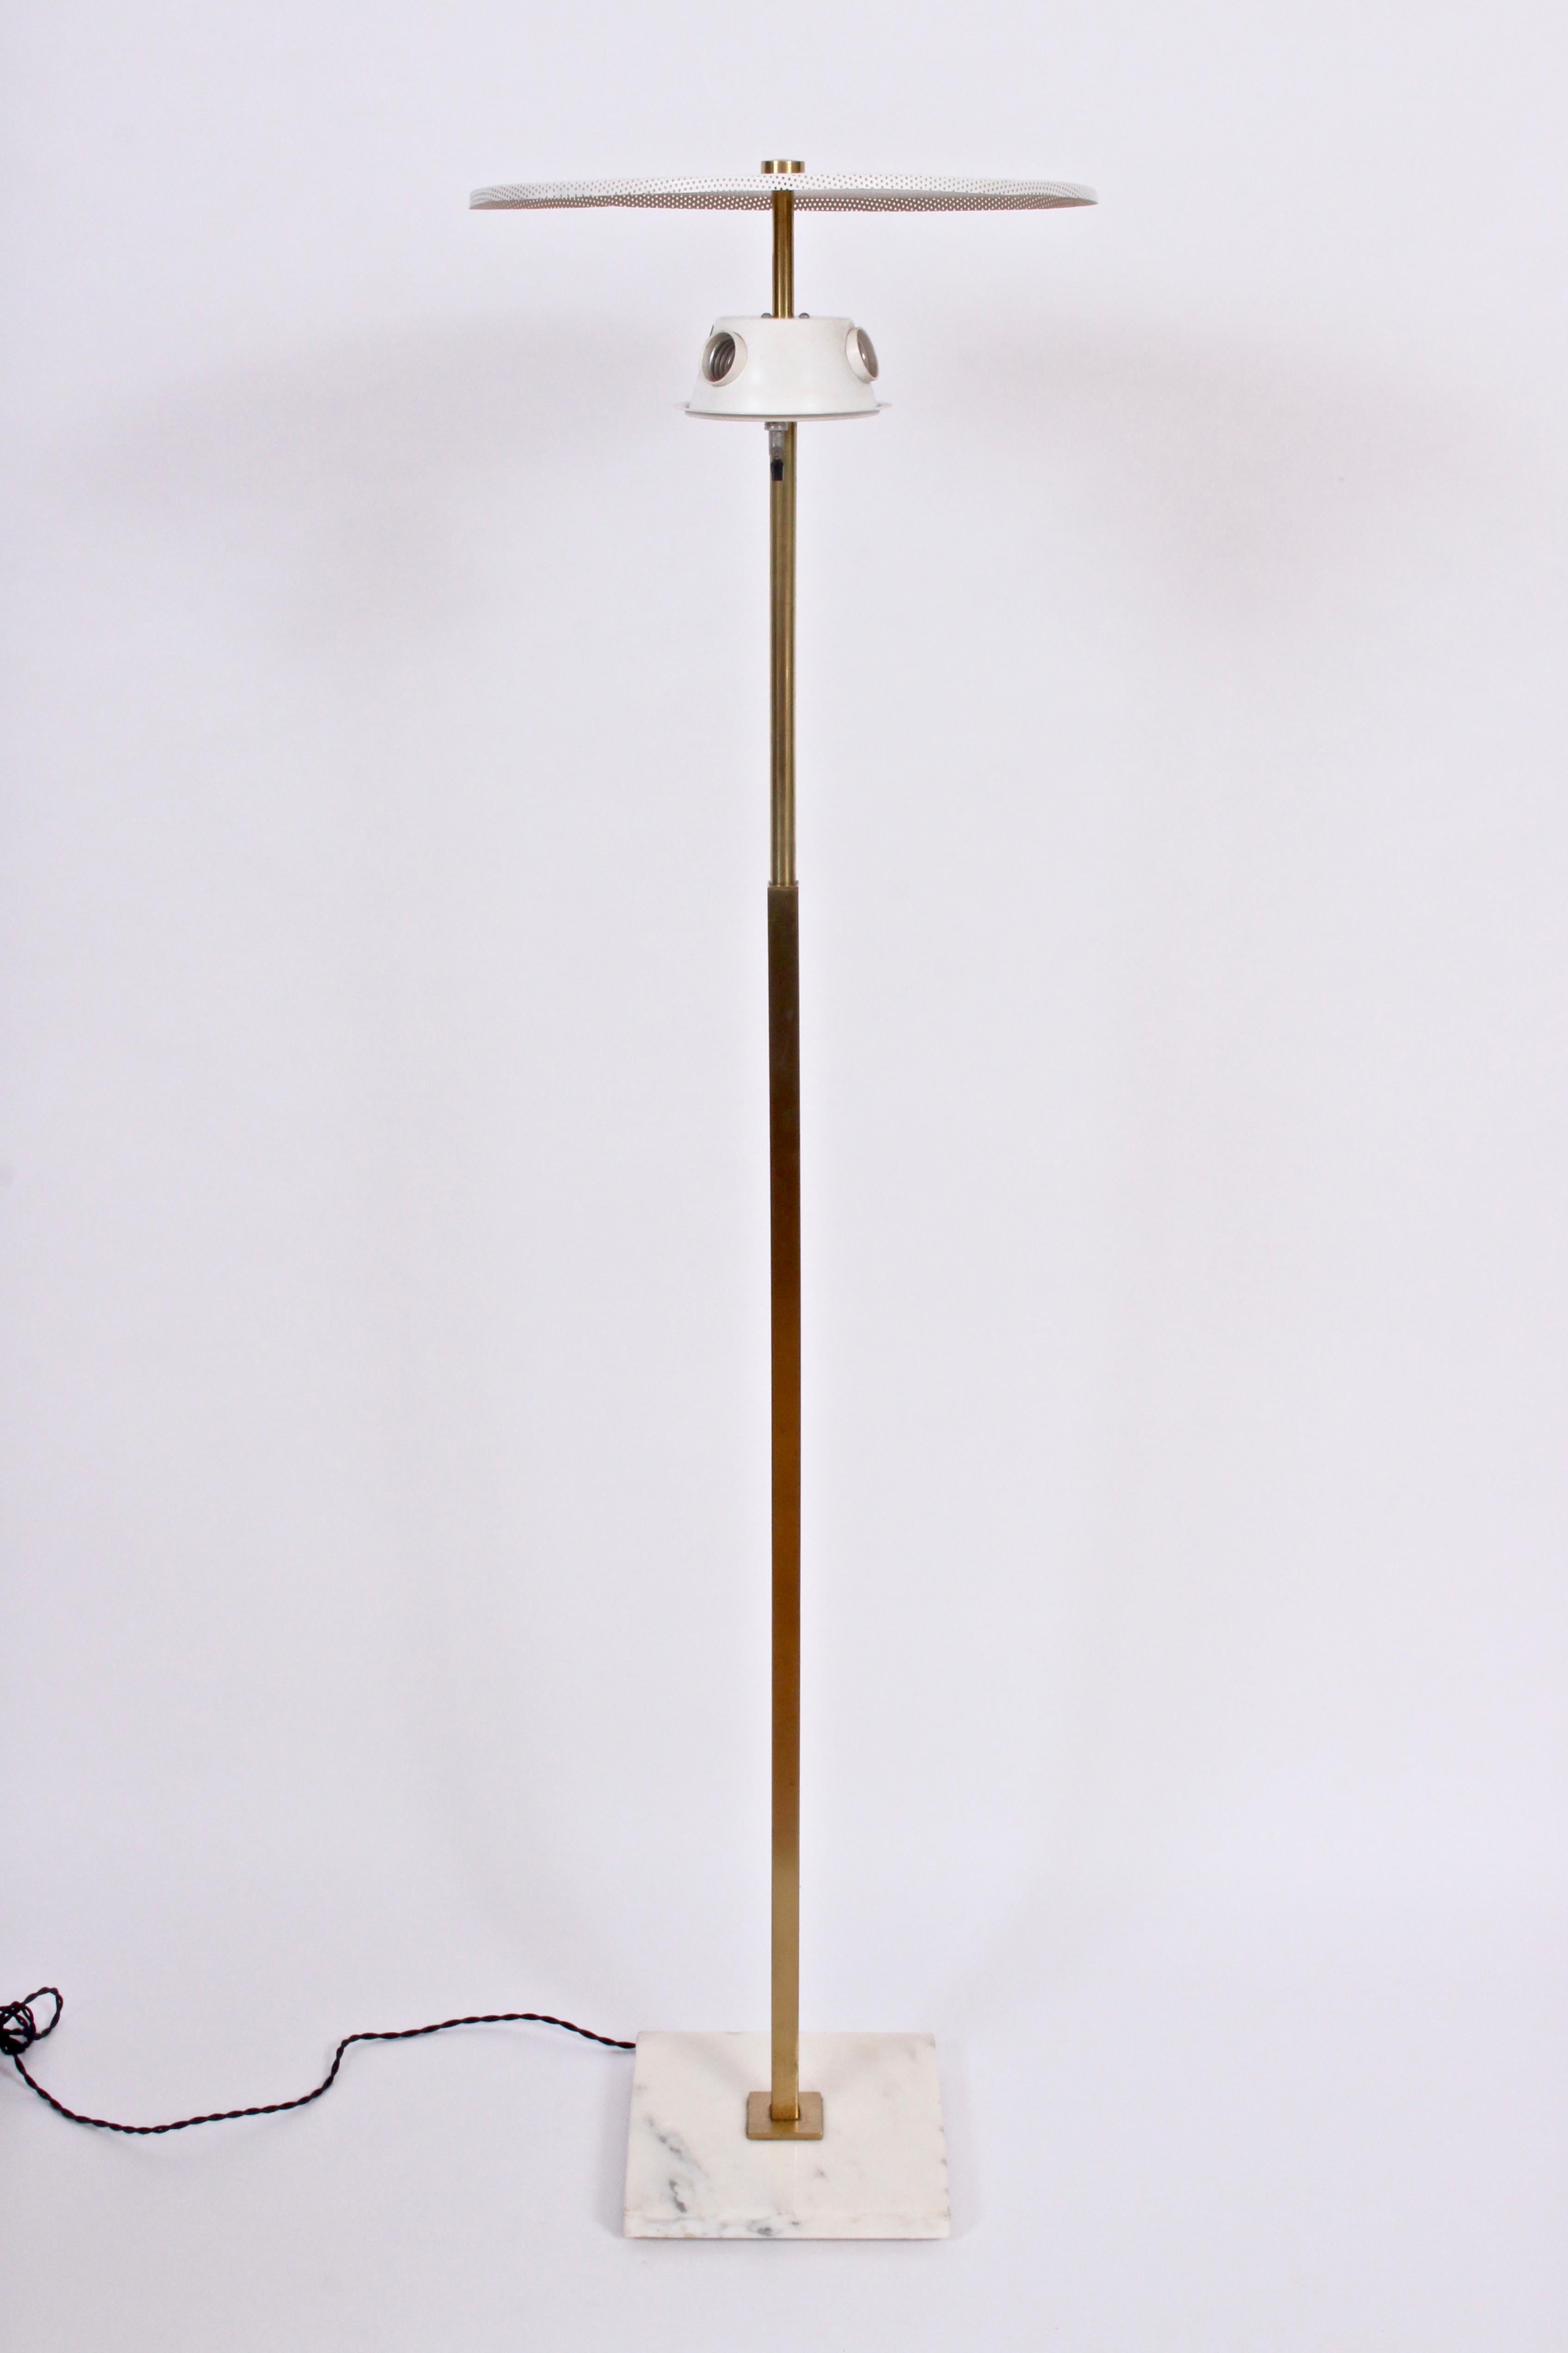 Gerald Thurston for Stiffel marble and brass reading floor lamp, early 1960's. Featuring a lower brass square stem flowing to upward round stem, new 19 D x 8 D white linen shade and square marble base.  White diffuser. Triple sockets. Classic.